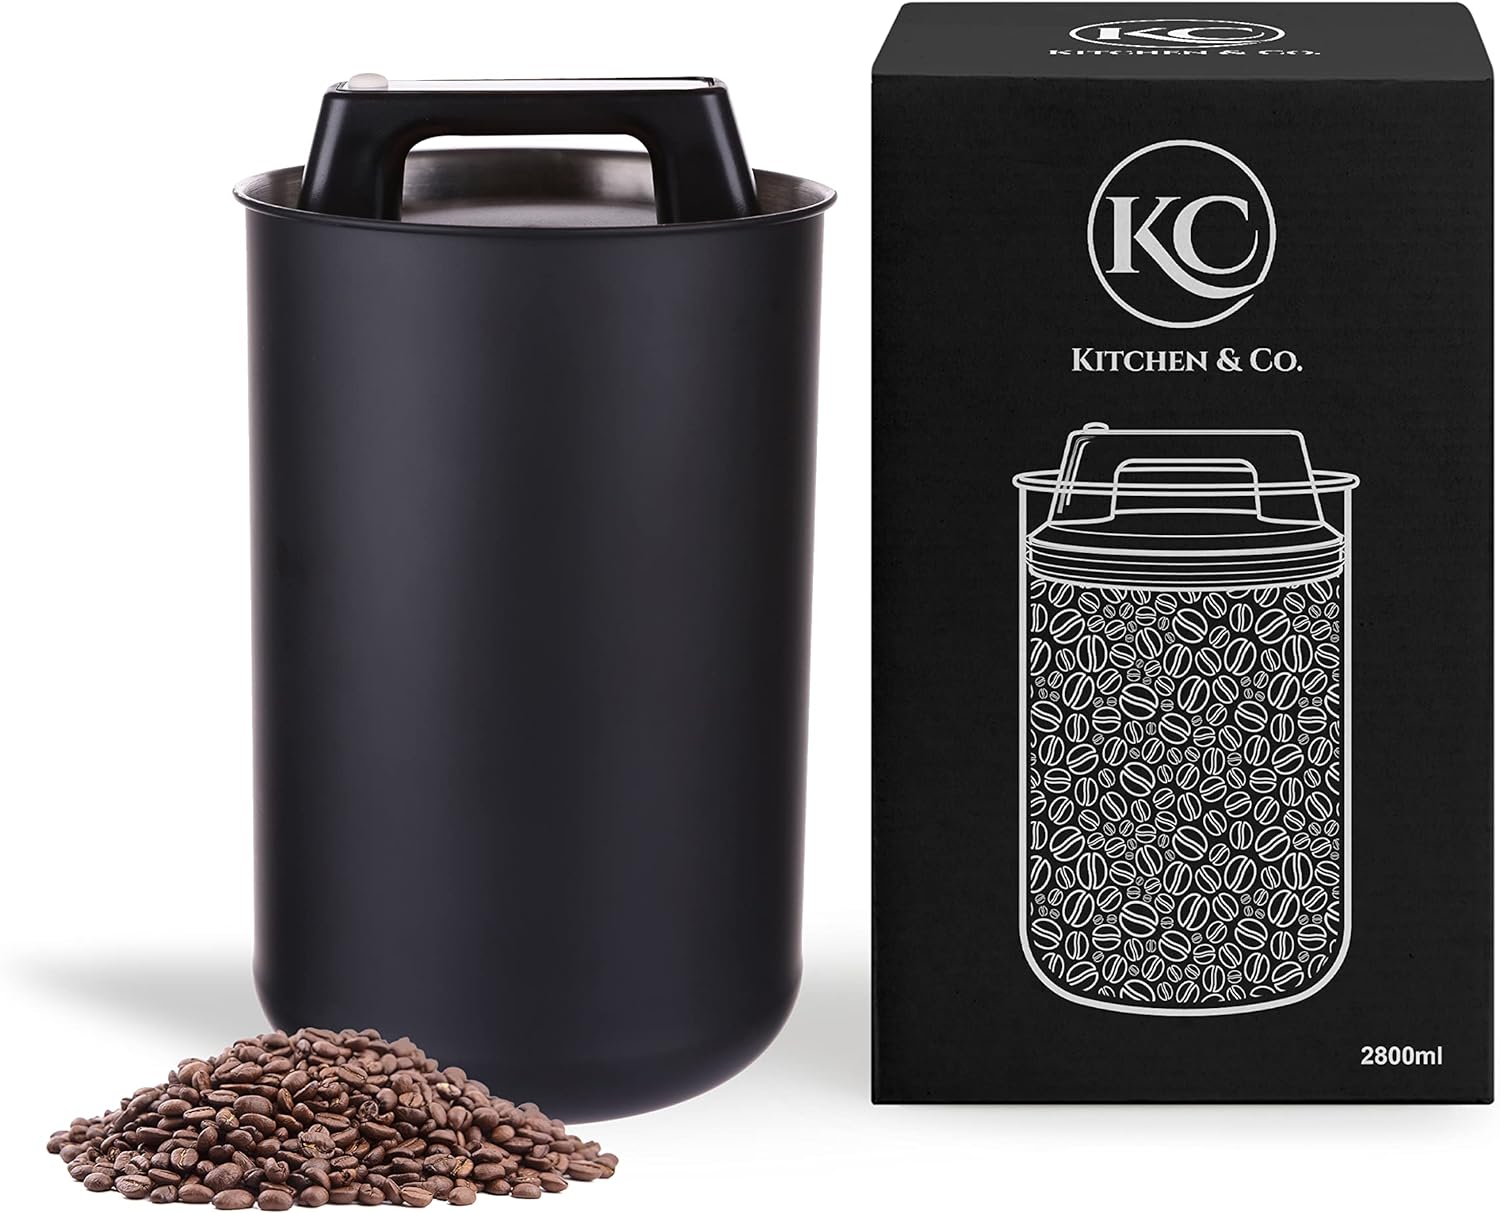 Airtight Coffee Canister for 1 kg Coffee Beans with Vacuum Lid (Container for Coffee, Tea, Stainless Steel Tin for Storage with Aroma Closure, Storage Jar for 1000 g Coffee) Matte Black (2800 ml)
